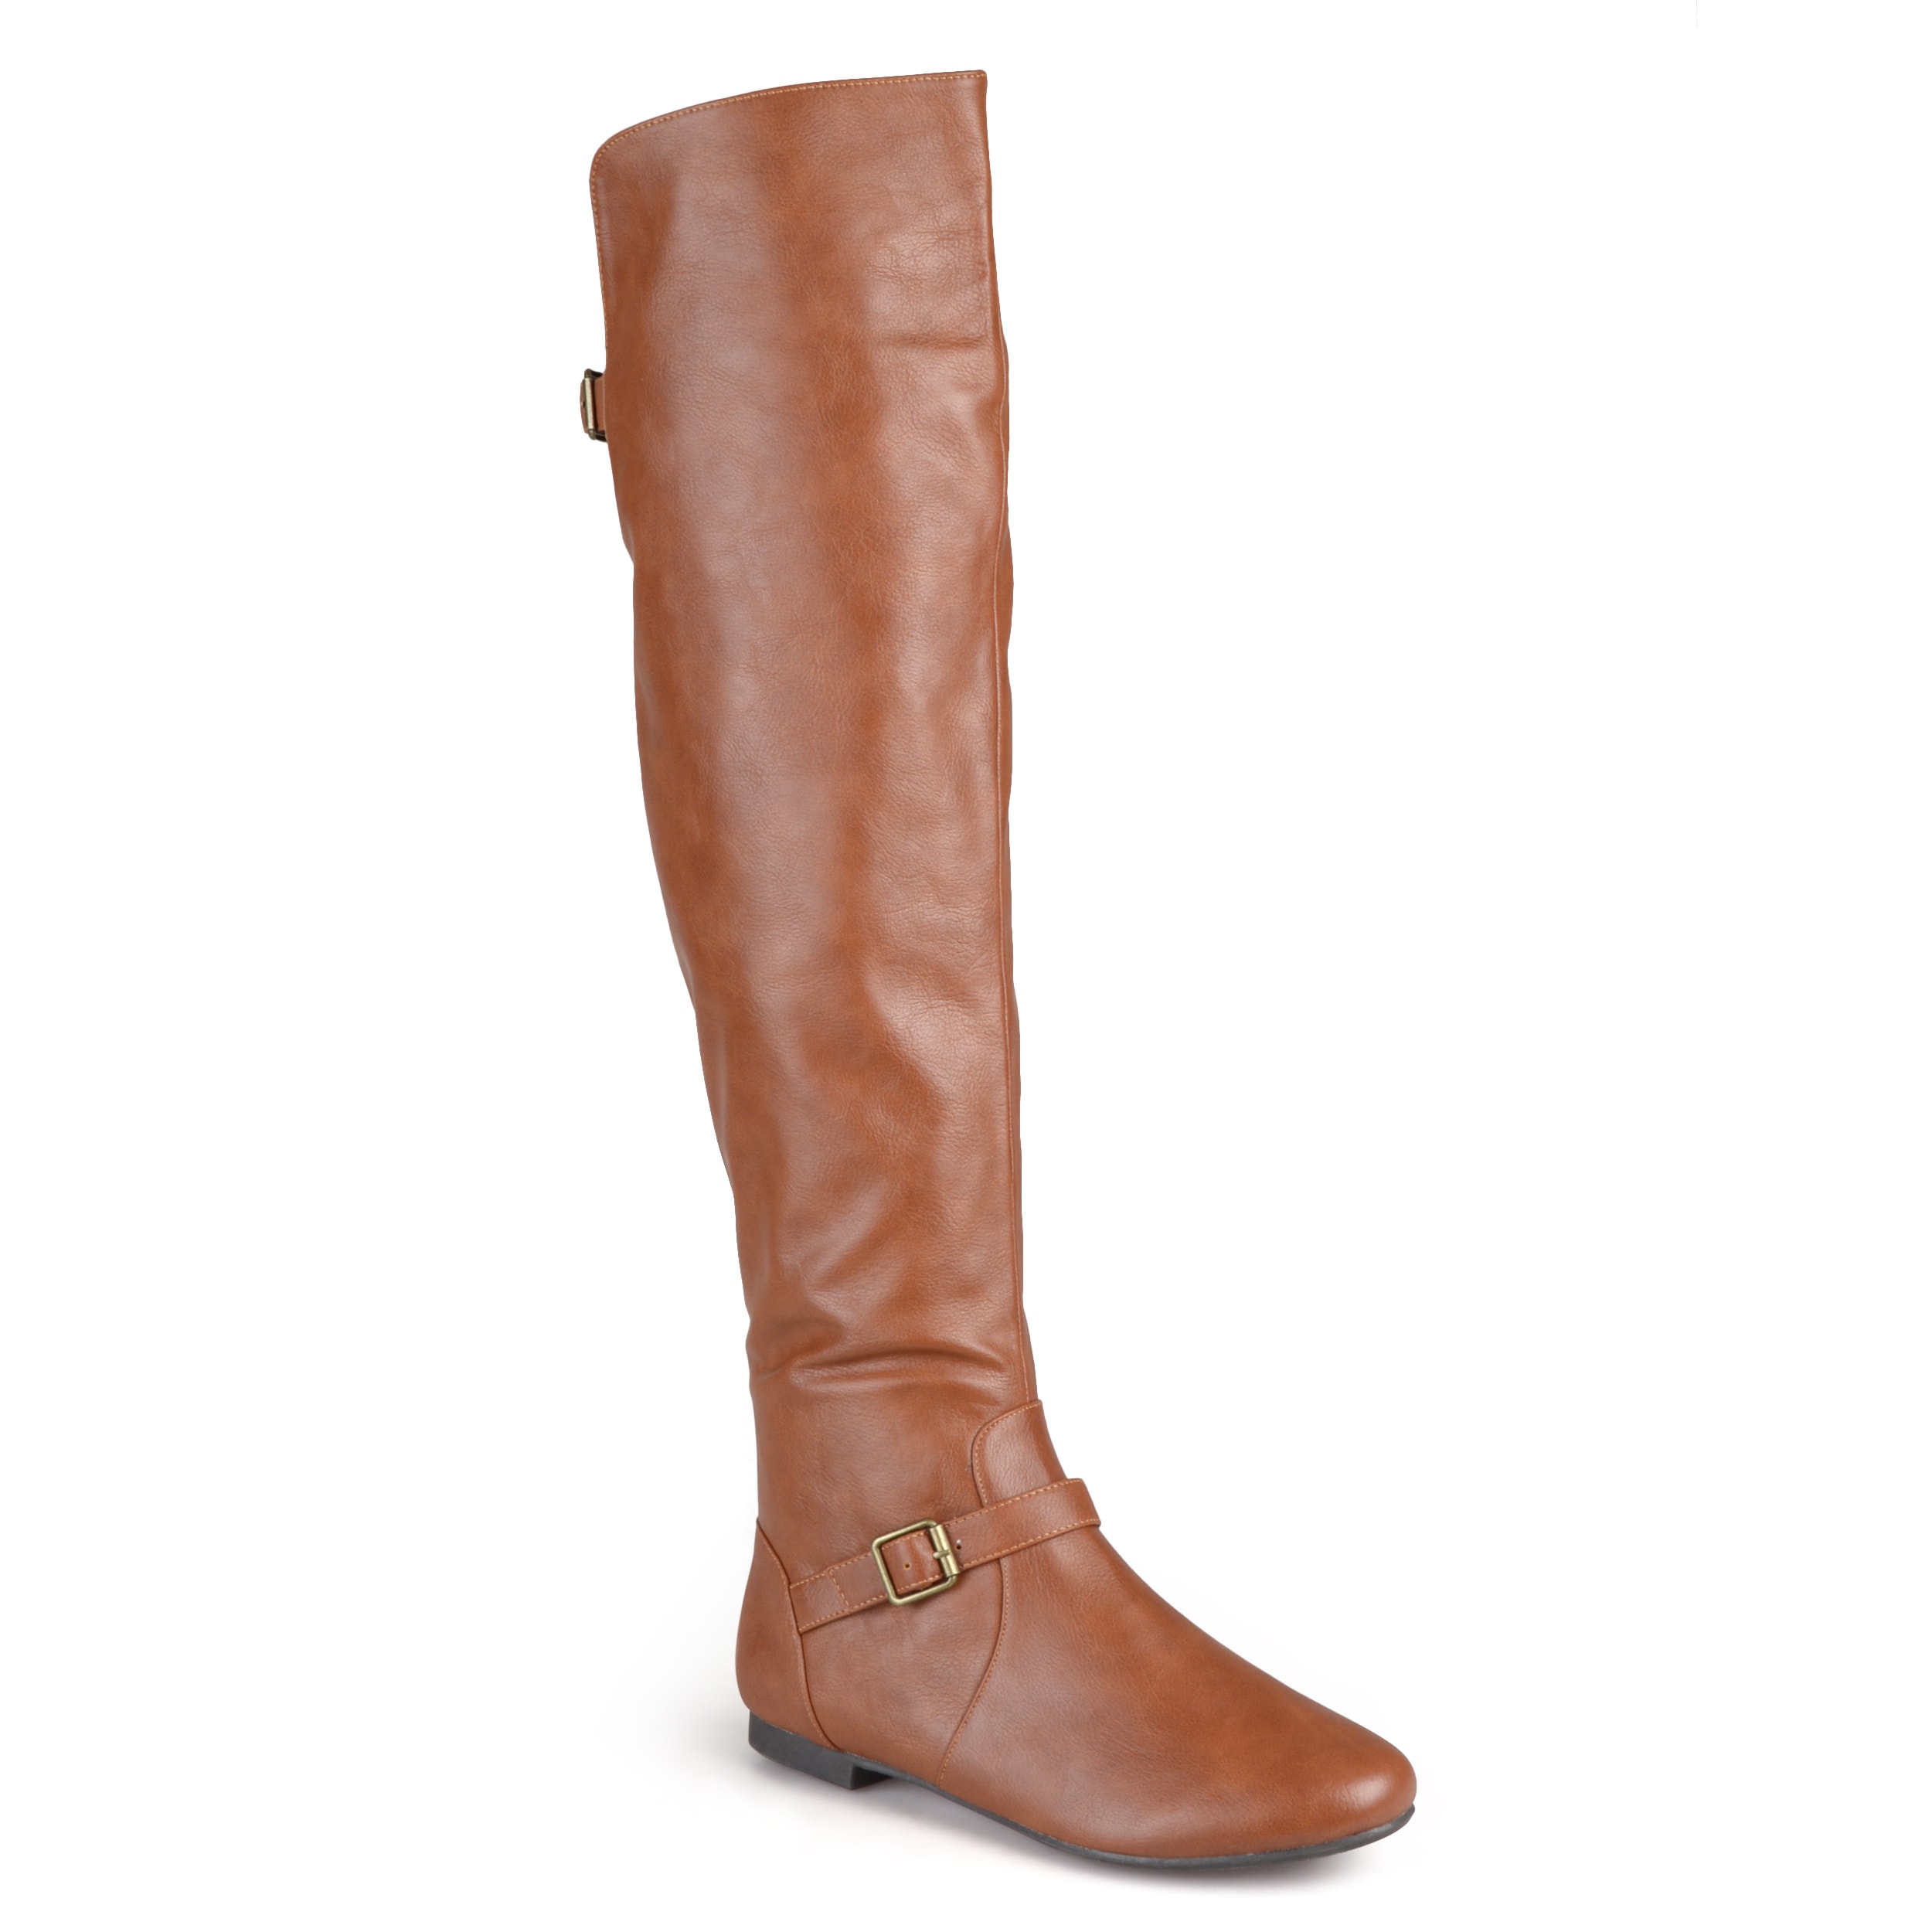 journee collection knee high boots